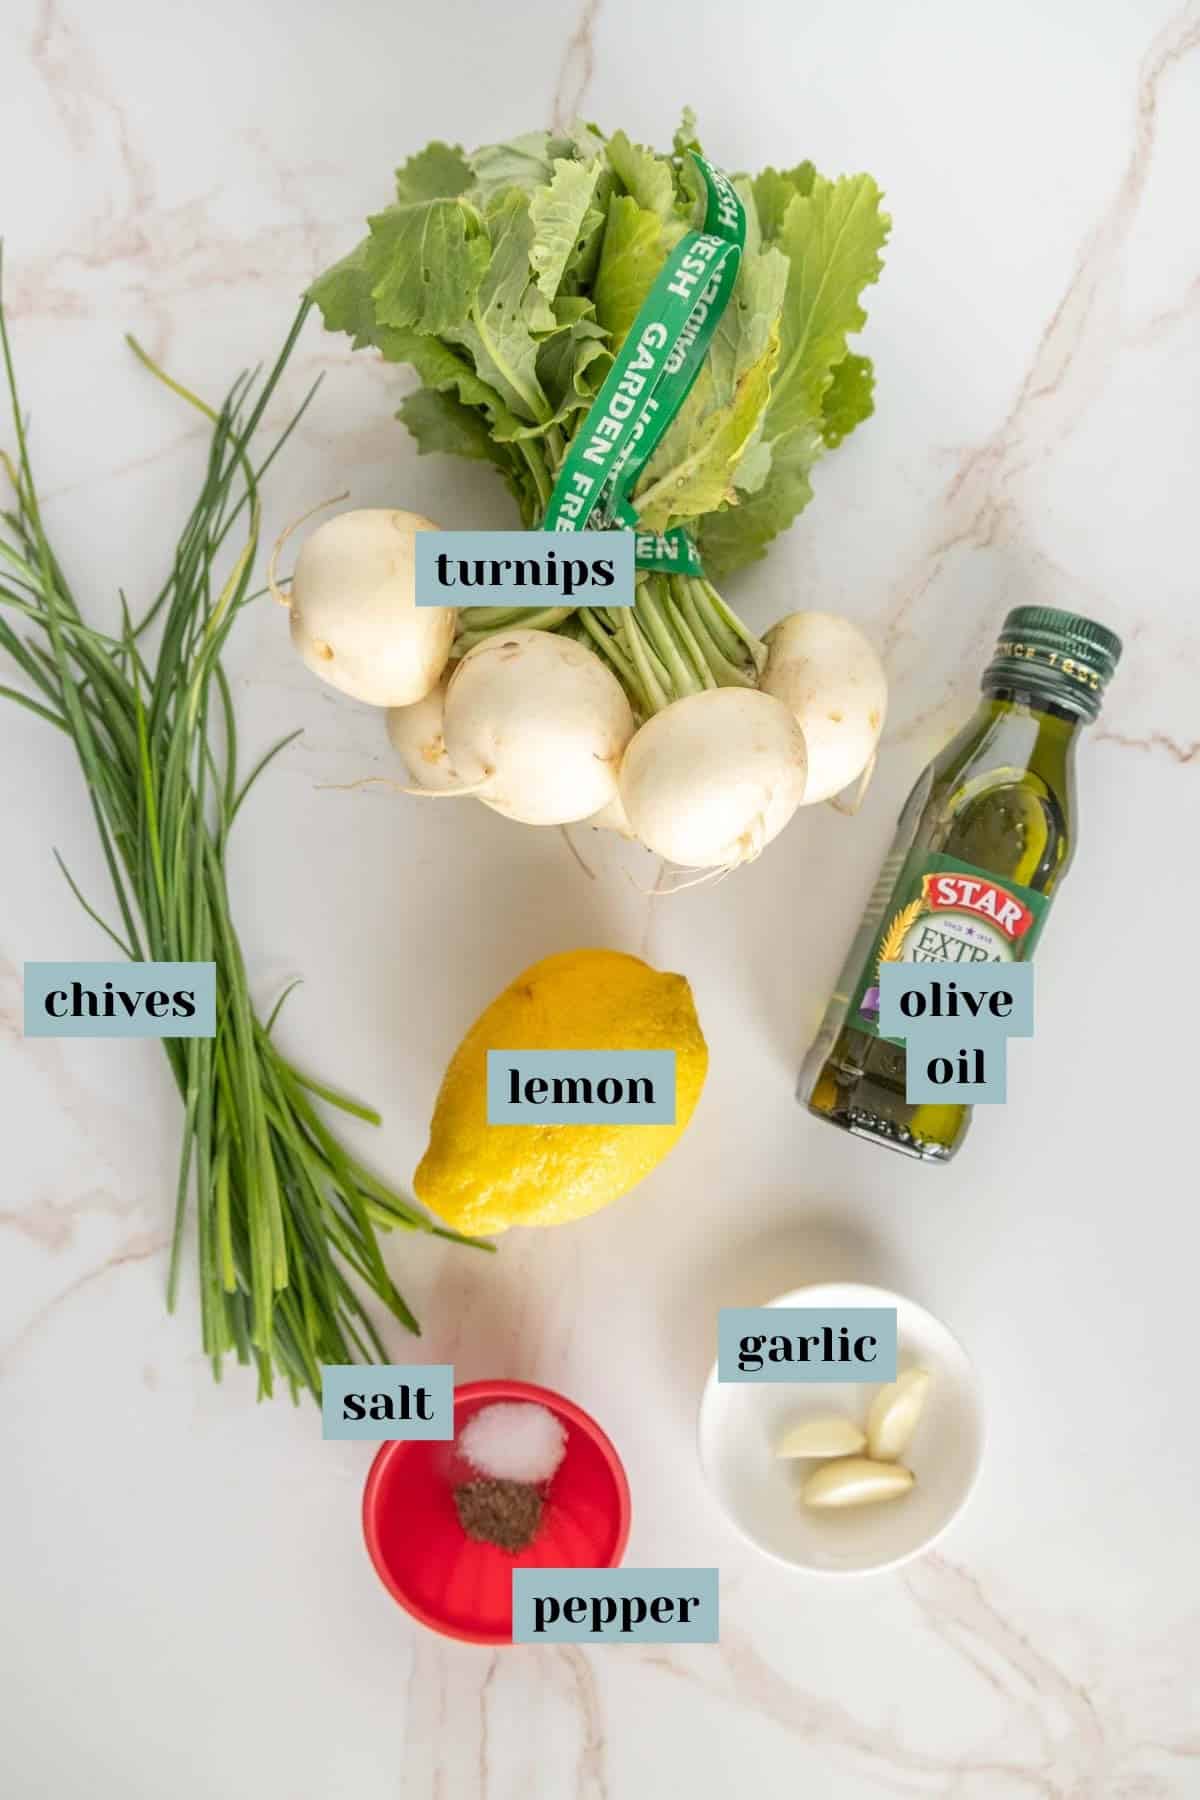 Ingredients arranged on a surface: a bunch of turnips, chives, a lemon, a bottle of olive oil, garlic cloves, and a small dish containing salt and pepper.